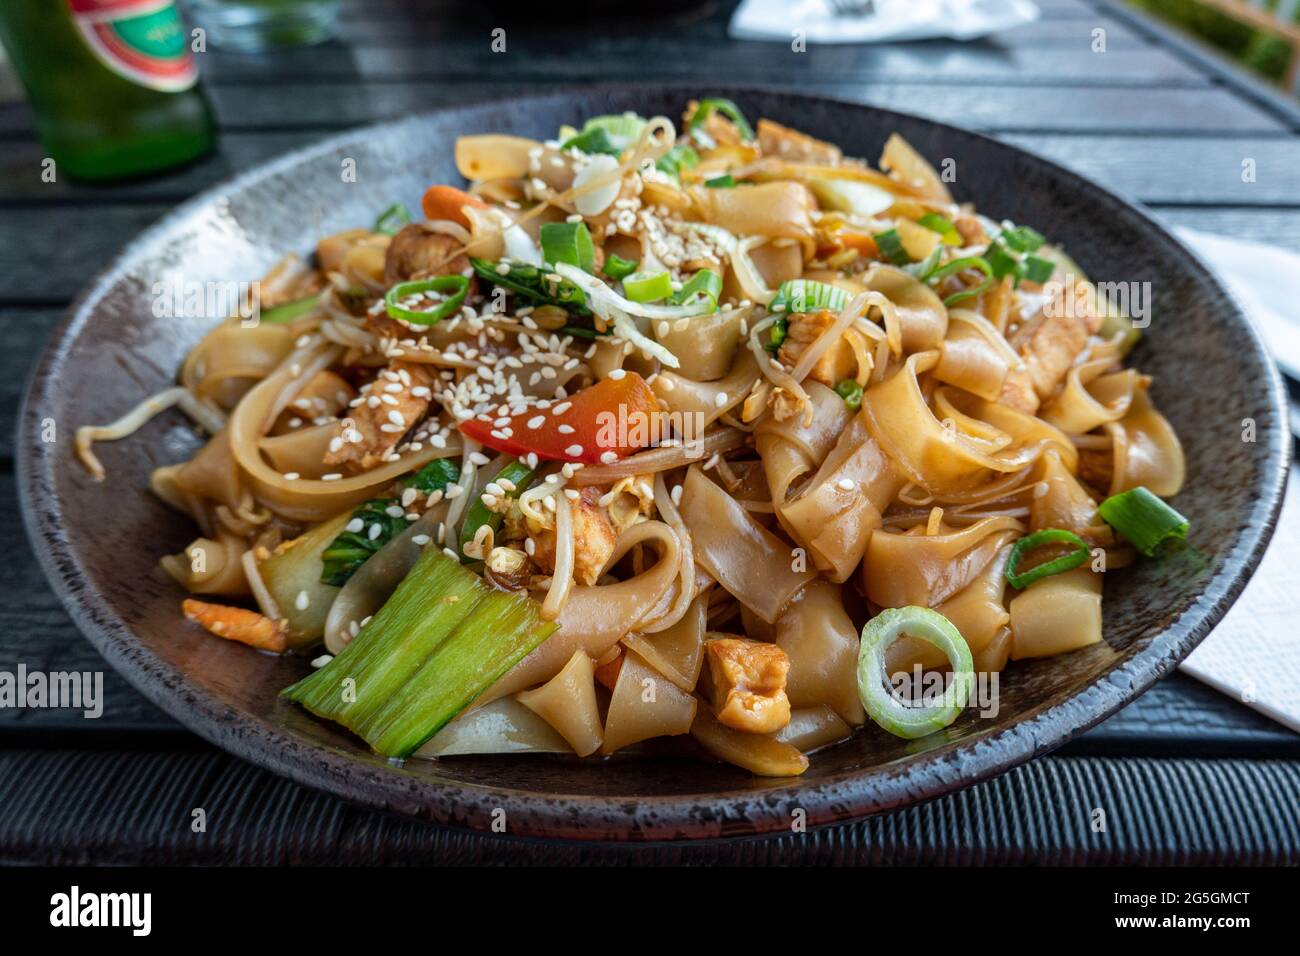 Portion of pan fried noodles with shredded chicken and spring onions in Kallio district of Helsinki, Finland Stock Photo